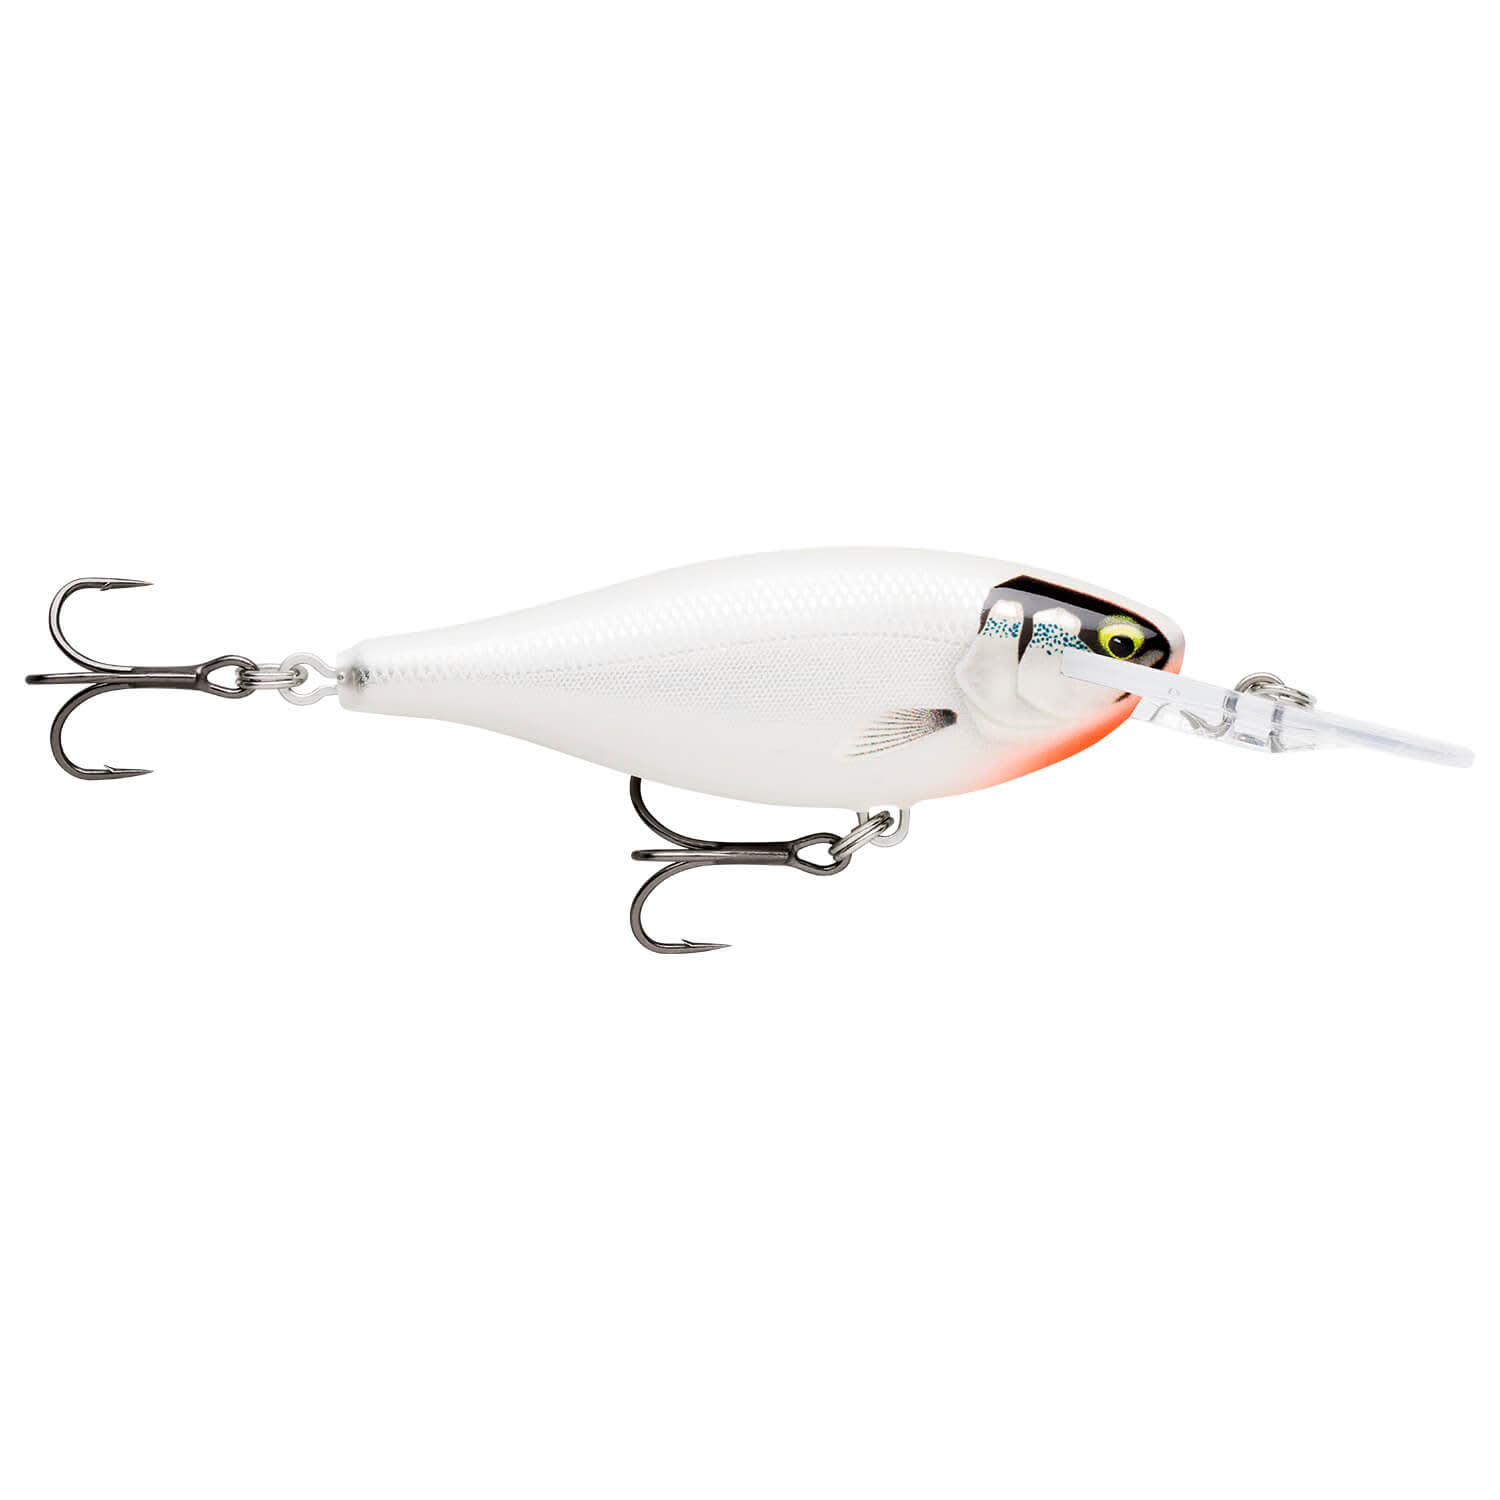 https://koeder-laden.mo.cloudinary.net/out/pictures/master/product/1/rapala-shad-rap-elite-gilded-glass-ghost.jpg